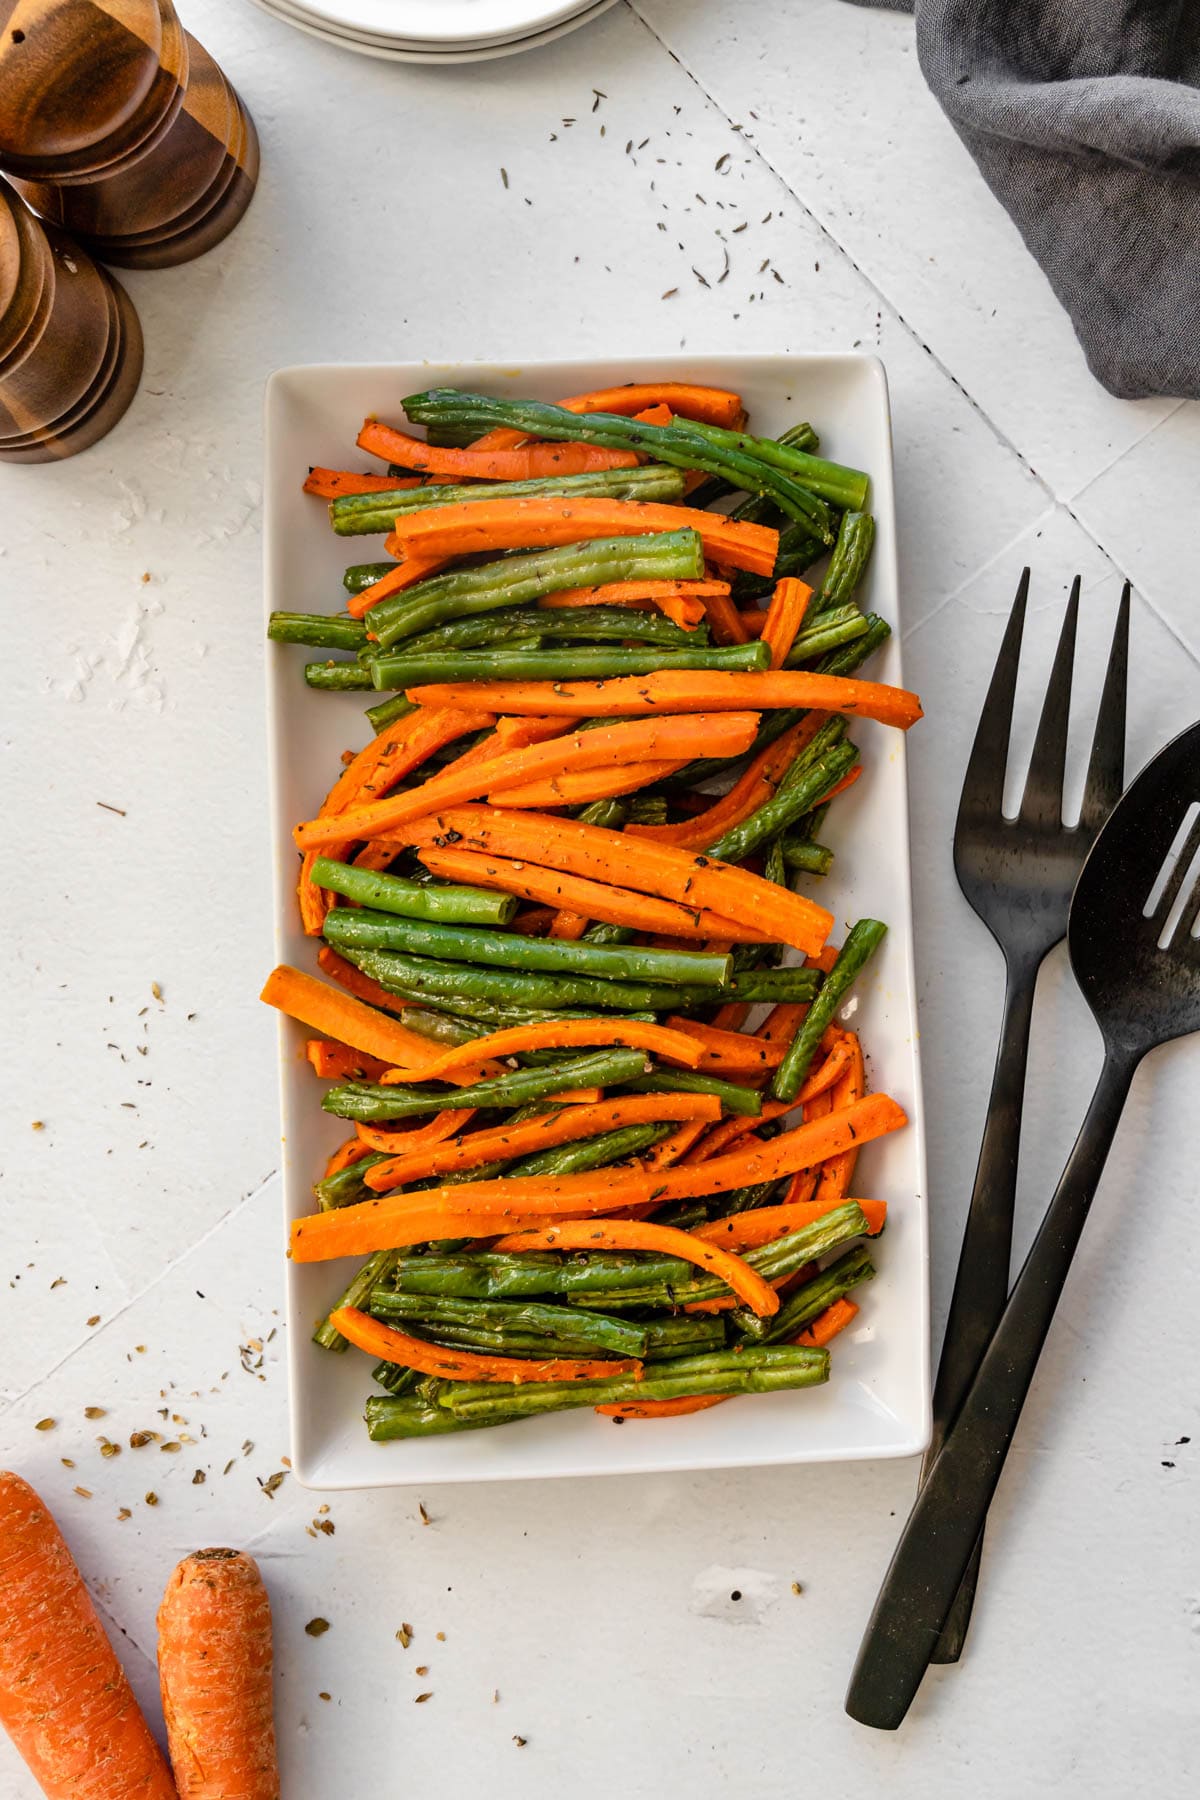 Carrots and green beans in air fryer